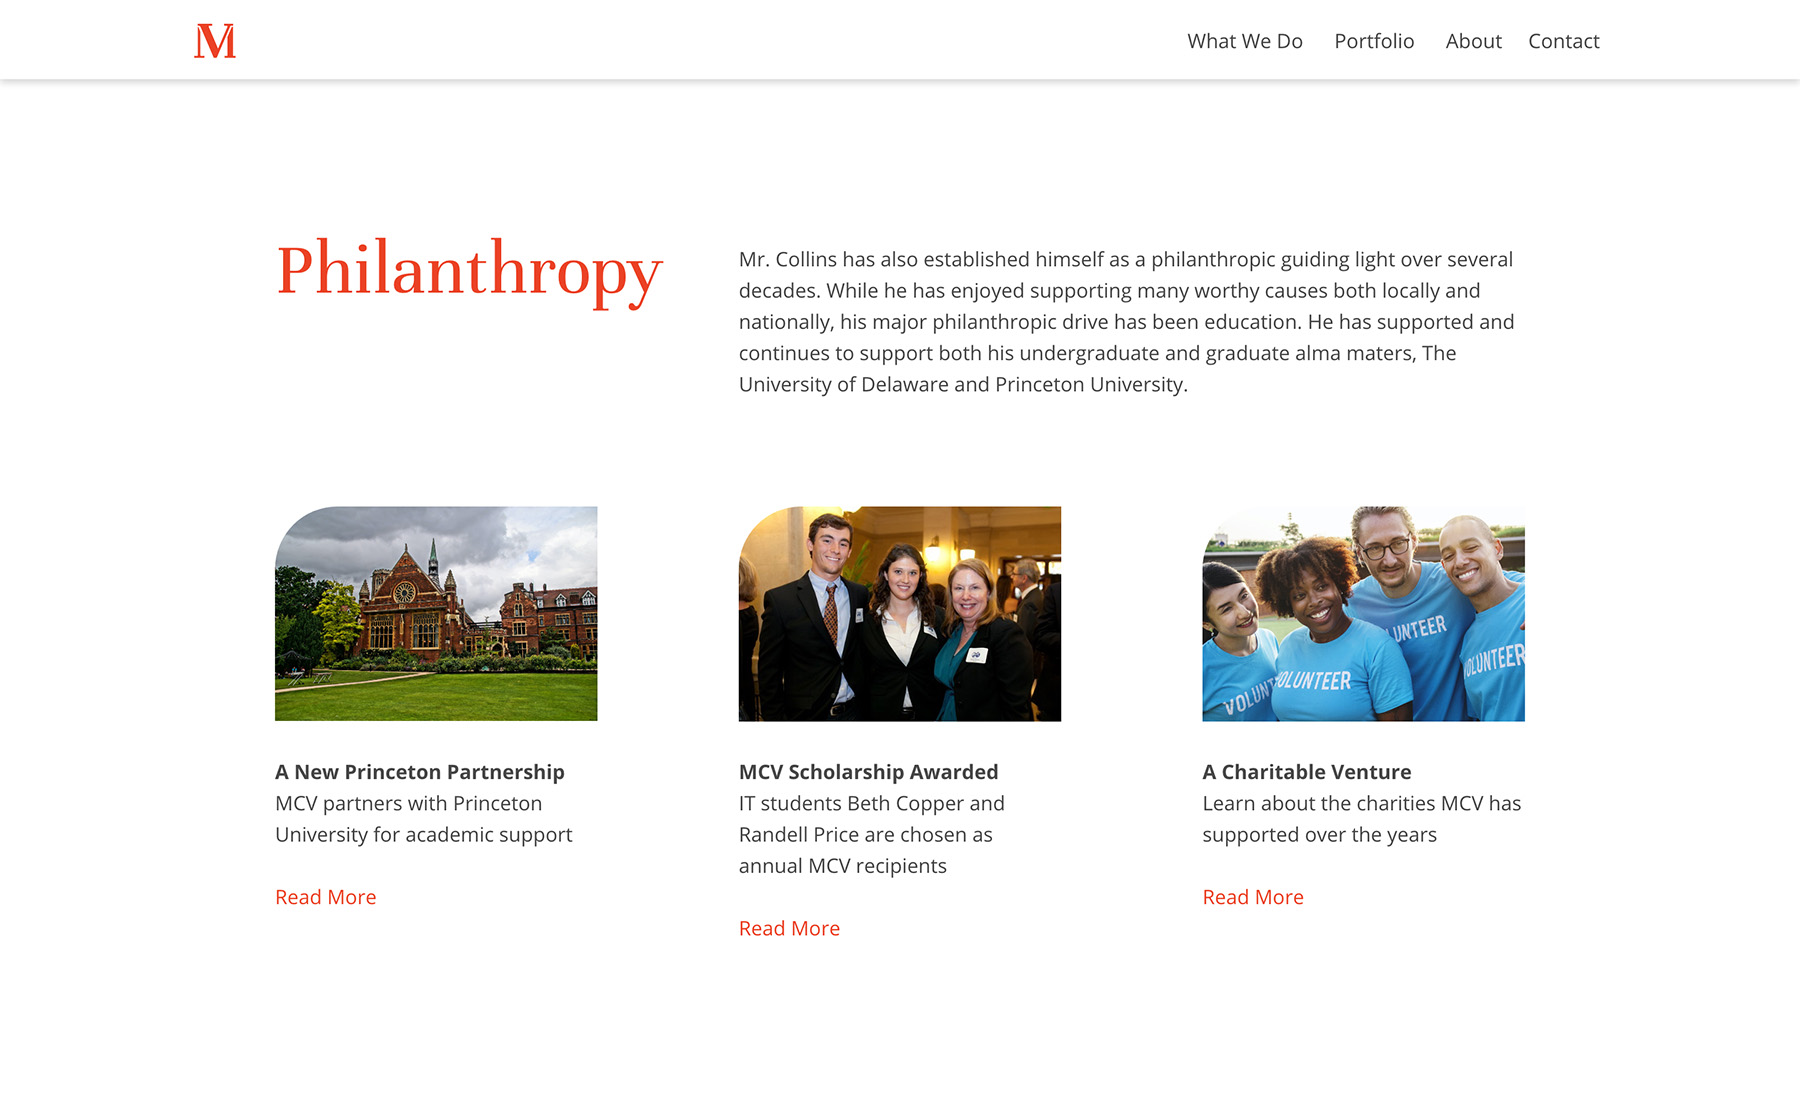 new philanthropy section